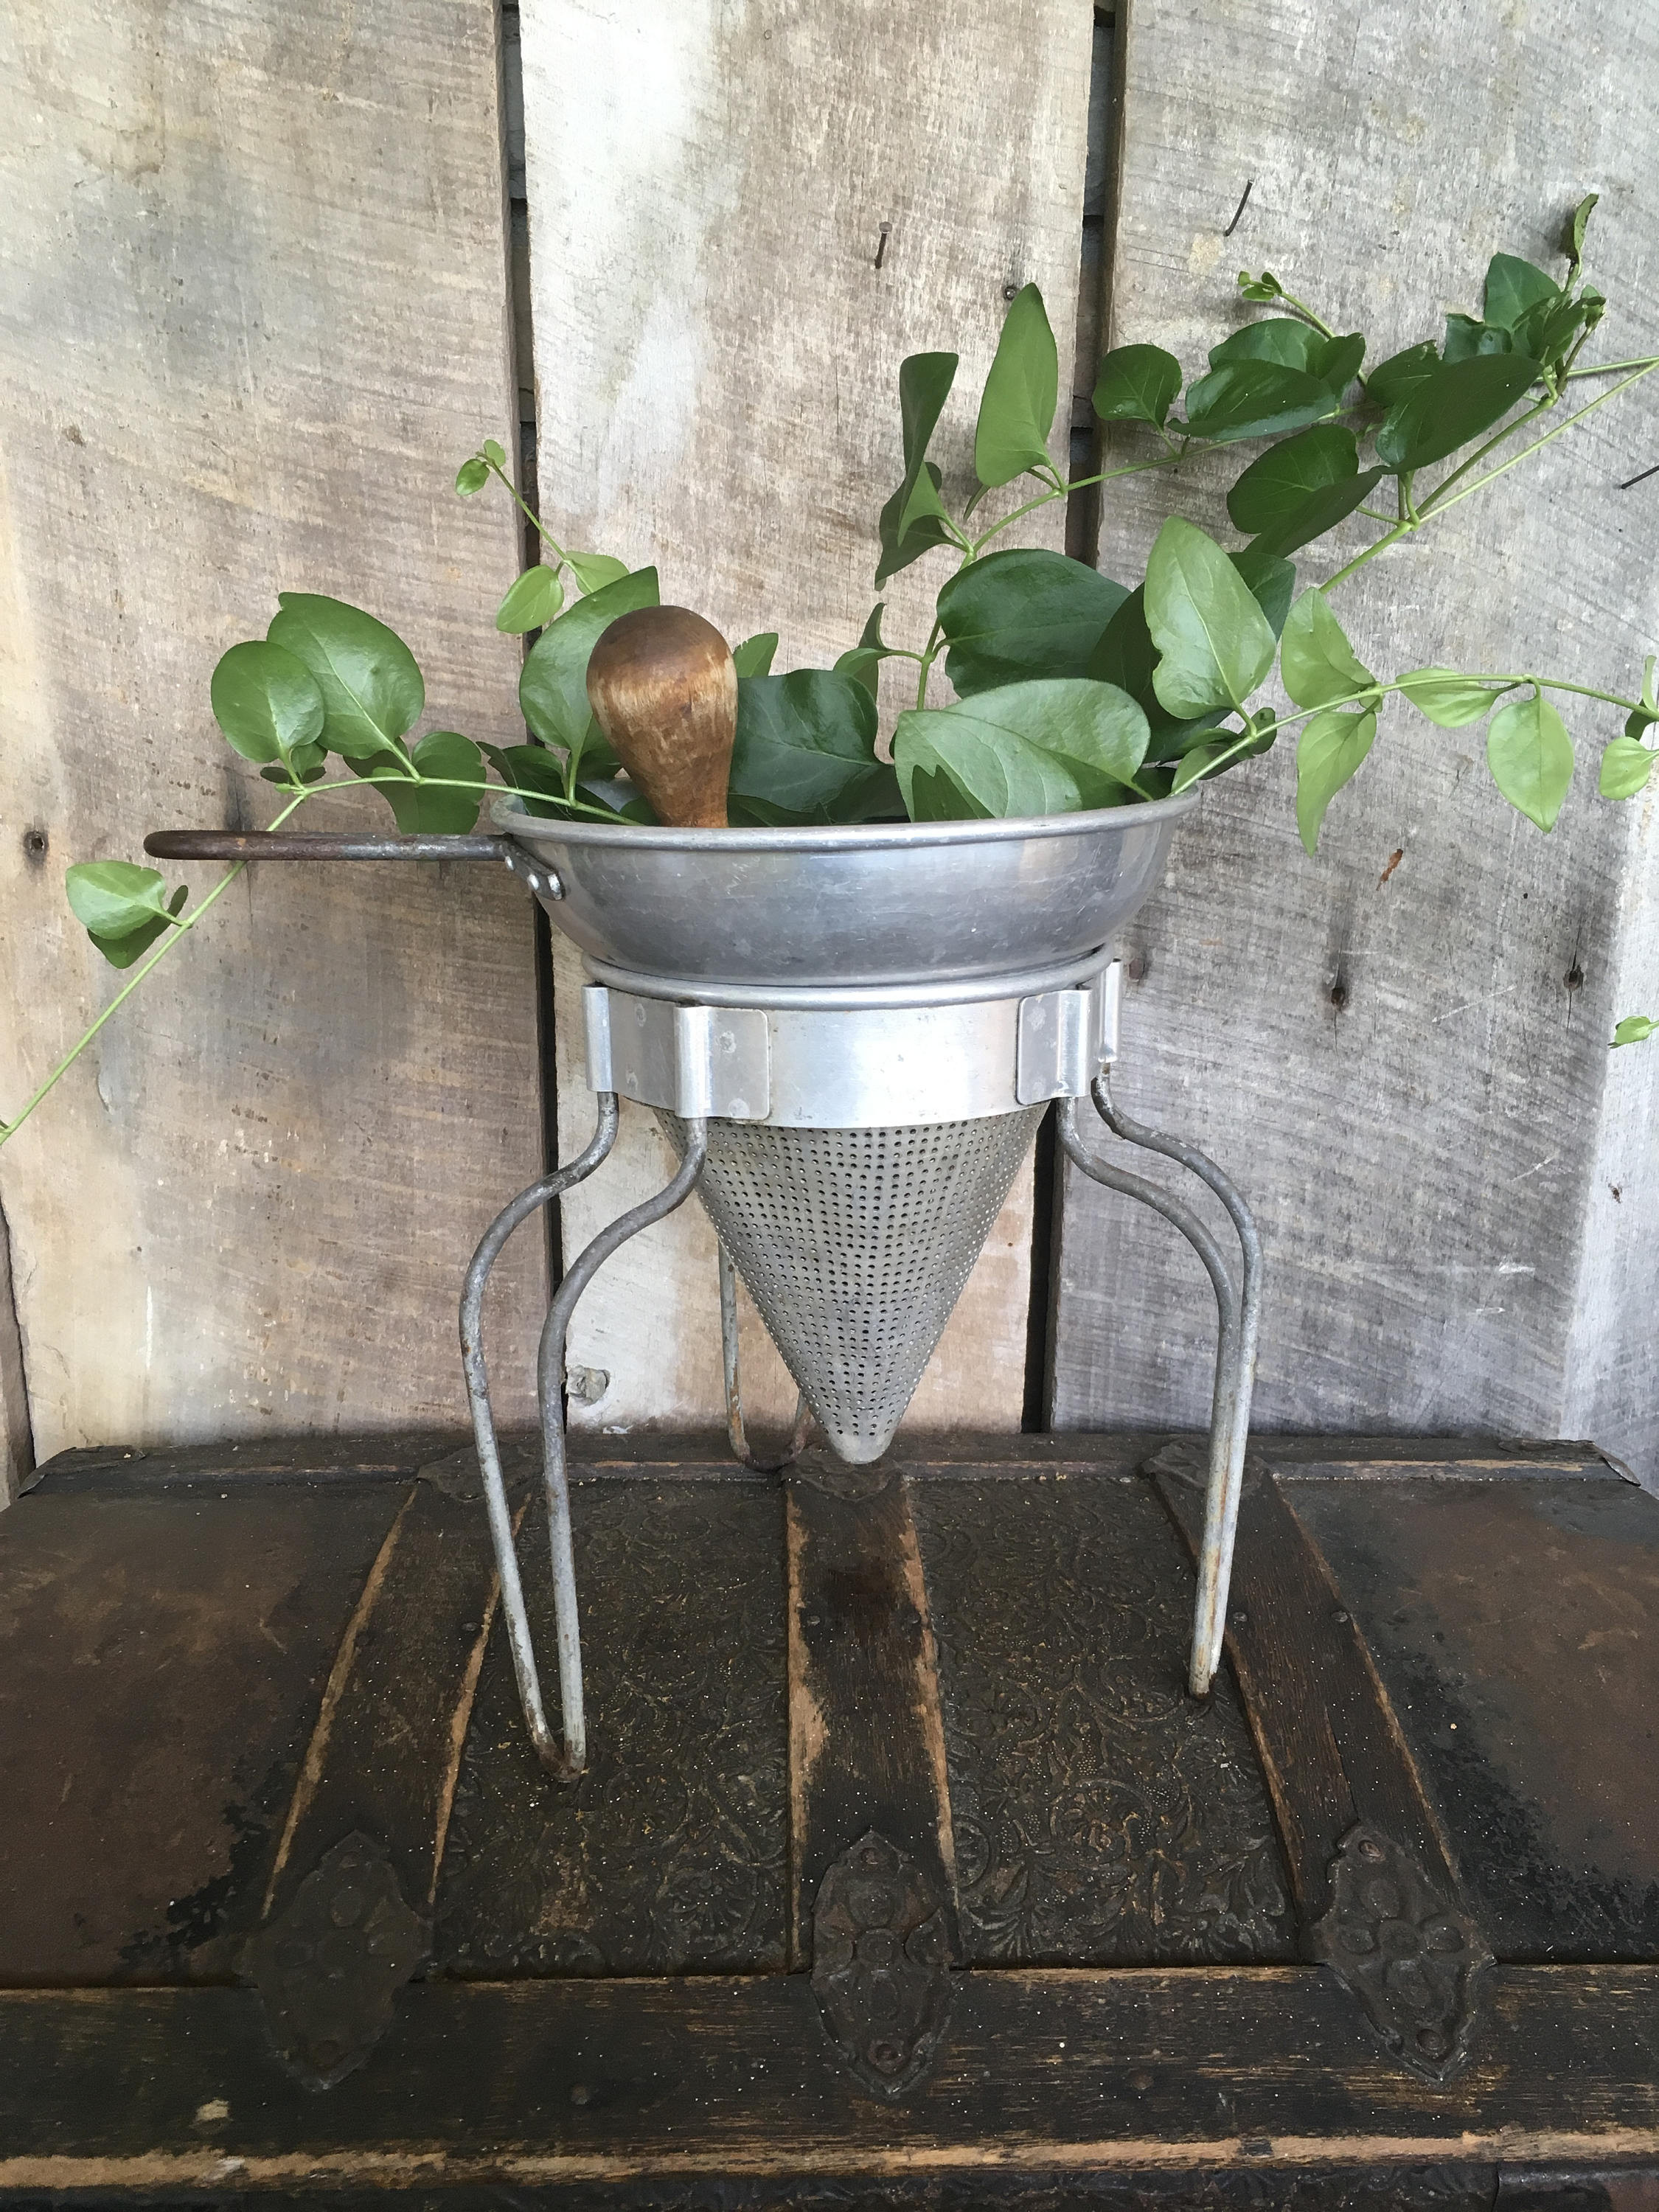 15 Famous Galvanized French Flower Vase 2023 free download galvanized french flower vase of vintage wear ever strainer aluminum juicer canning wood mallet etsy with dc29fc294c28ezoom